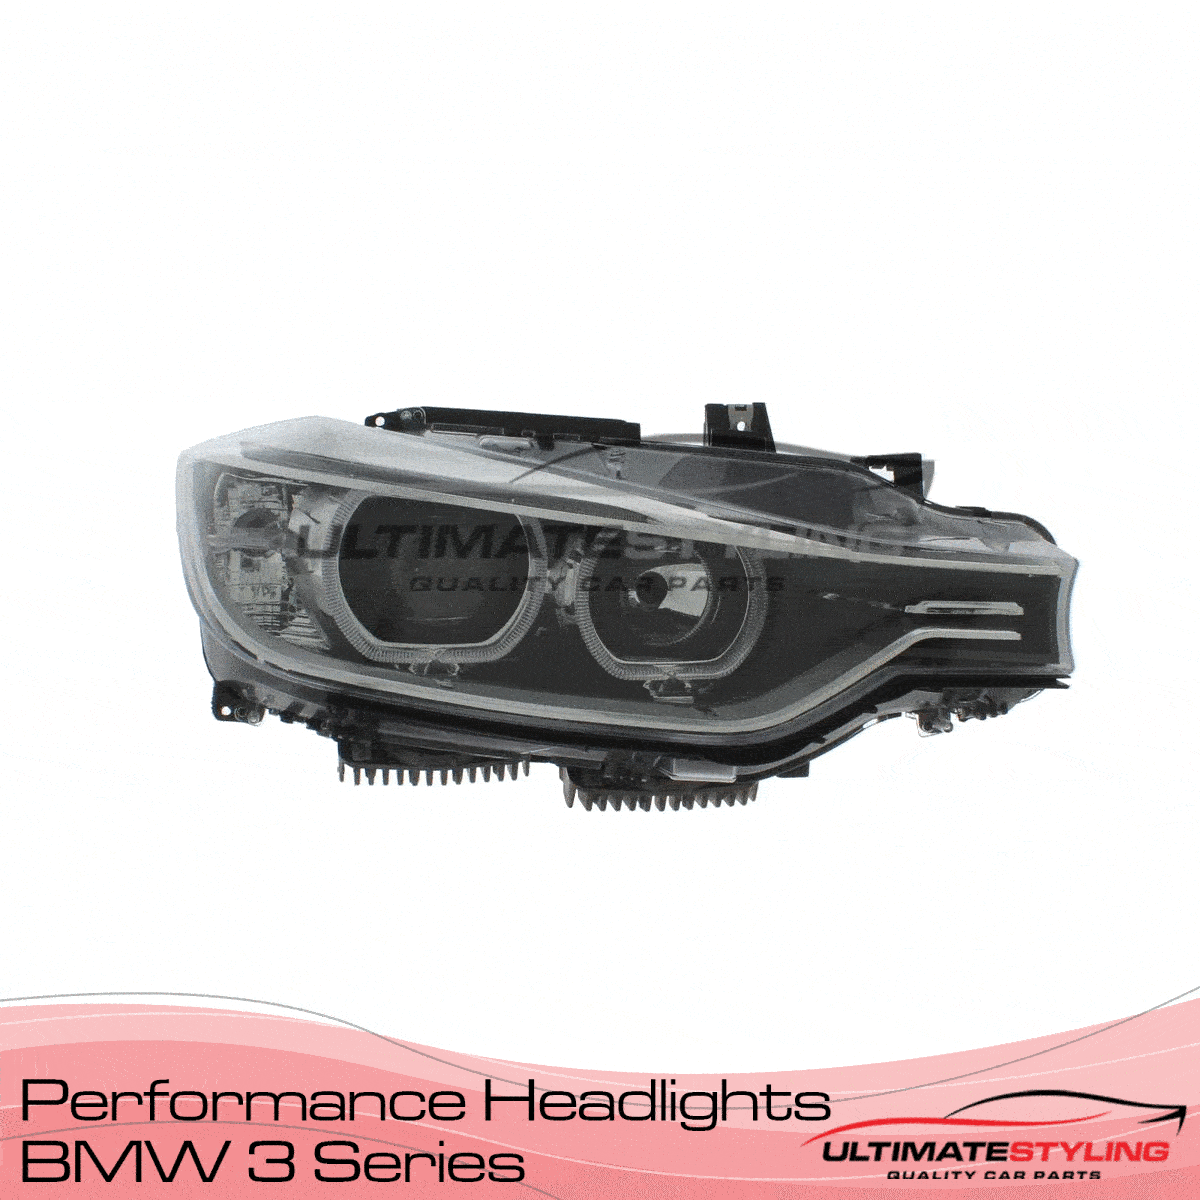 360 view of a BMW 3 Series aftermarket headlight upgrade